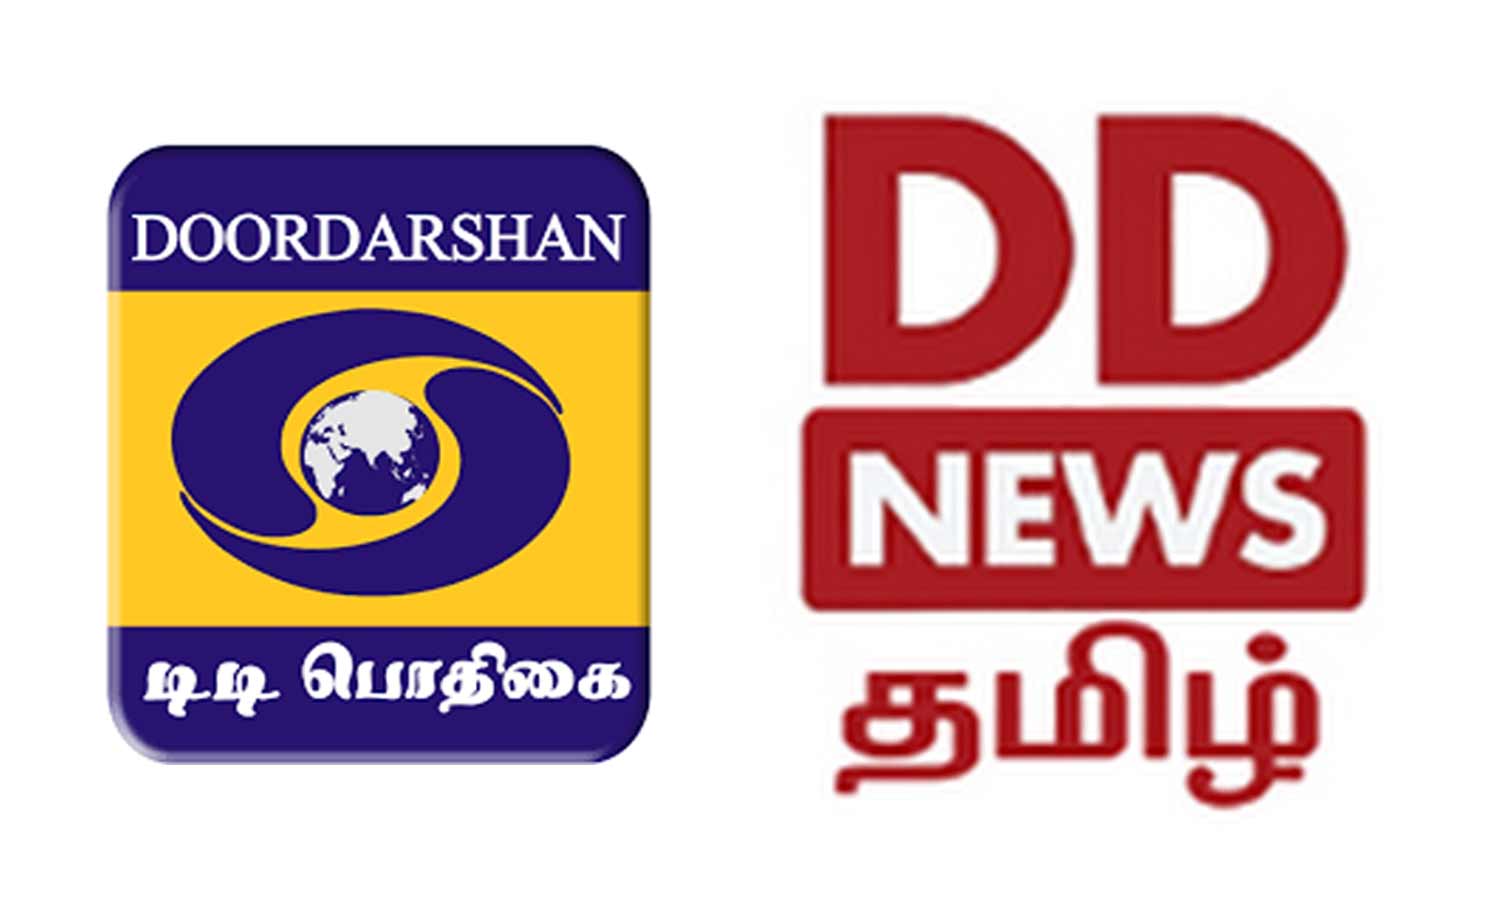 Prasar Bharati announces launch of DD India HD | Indian Television Dot Com